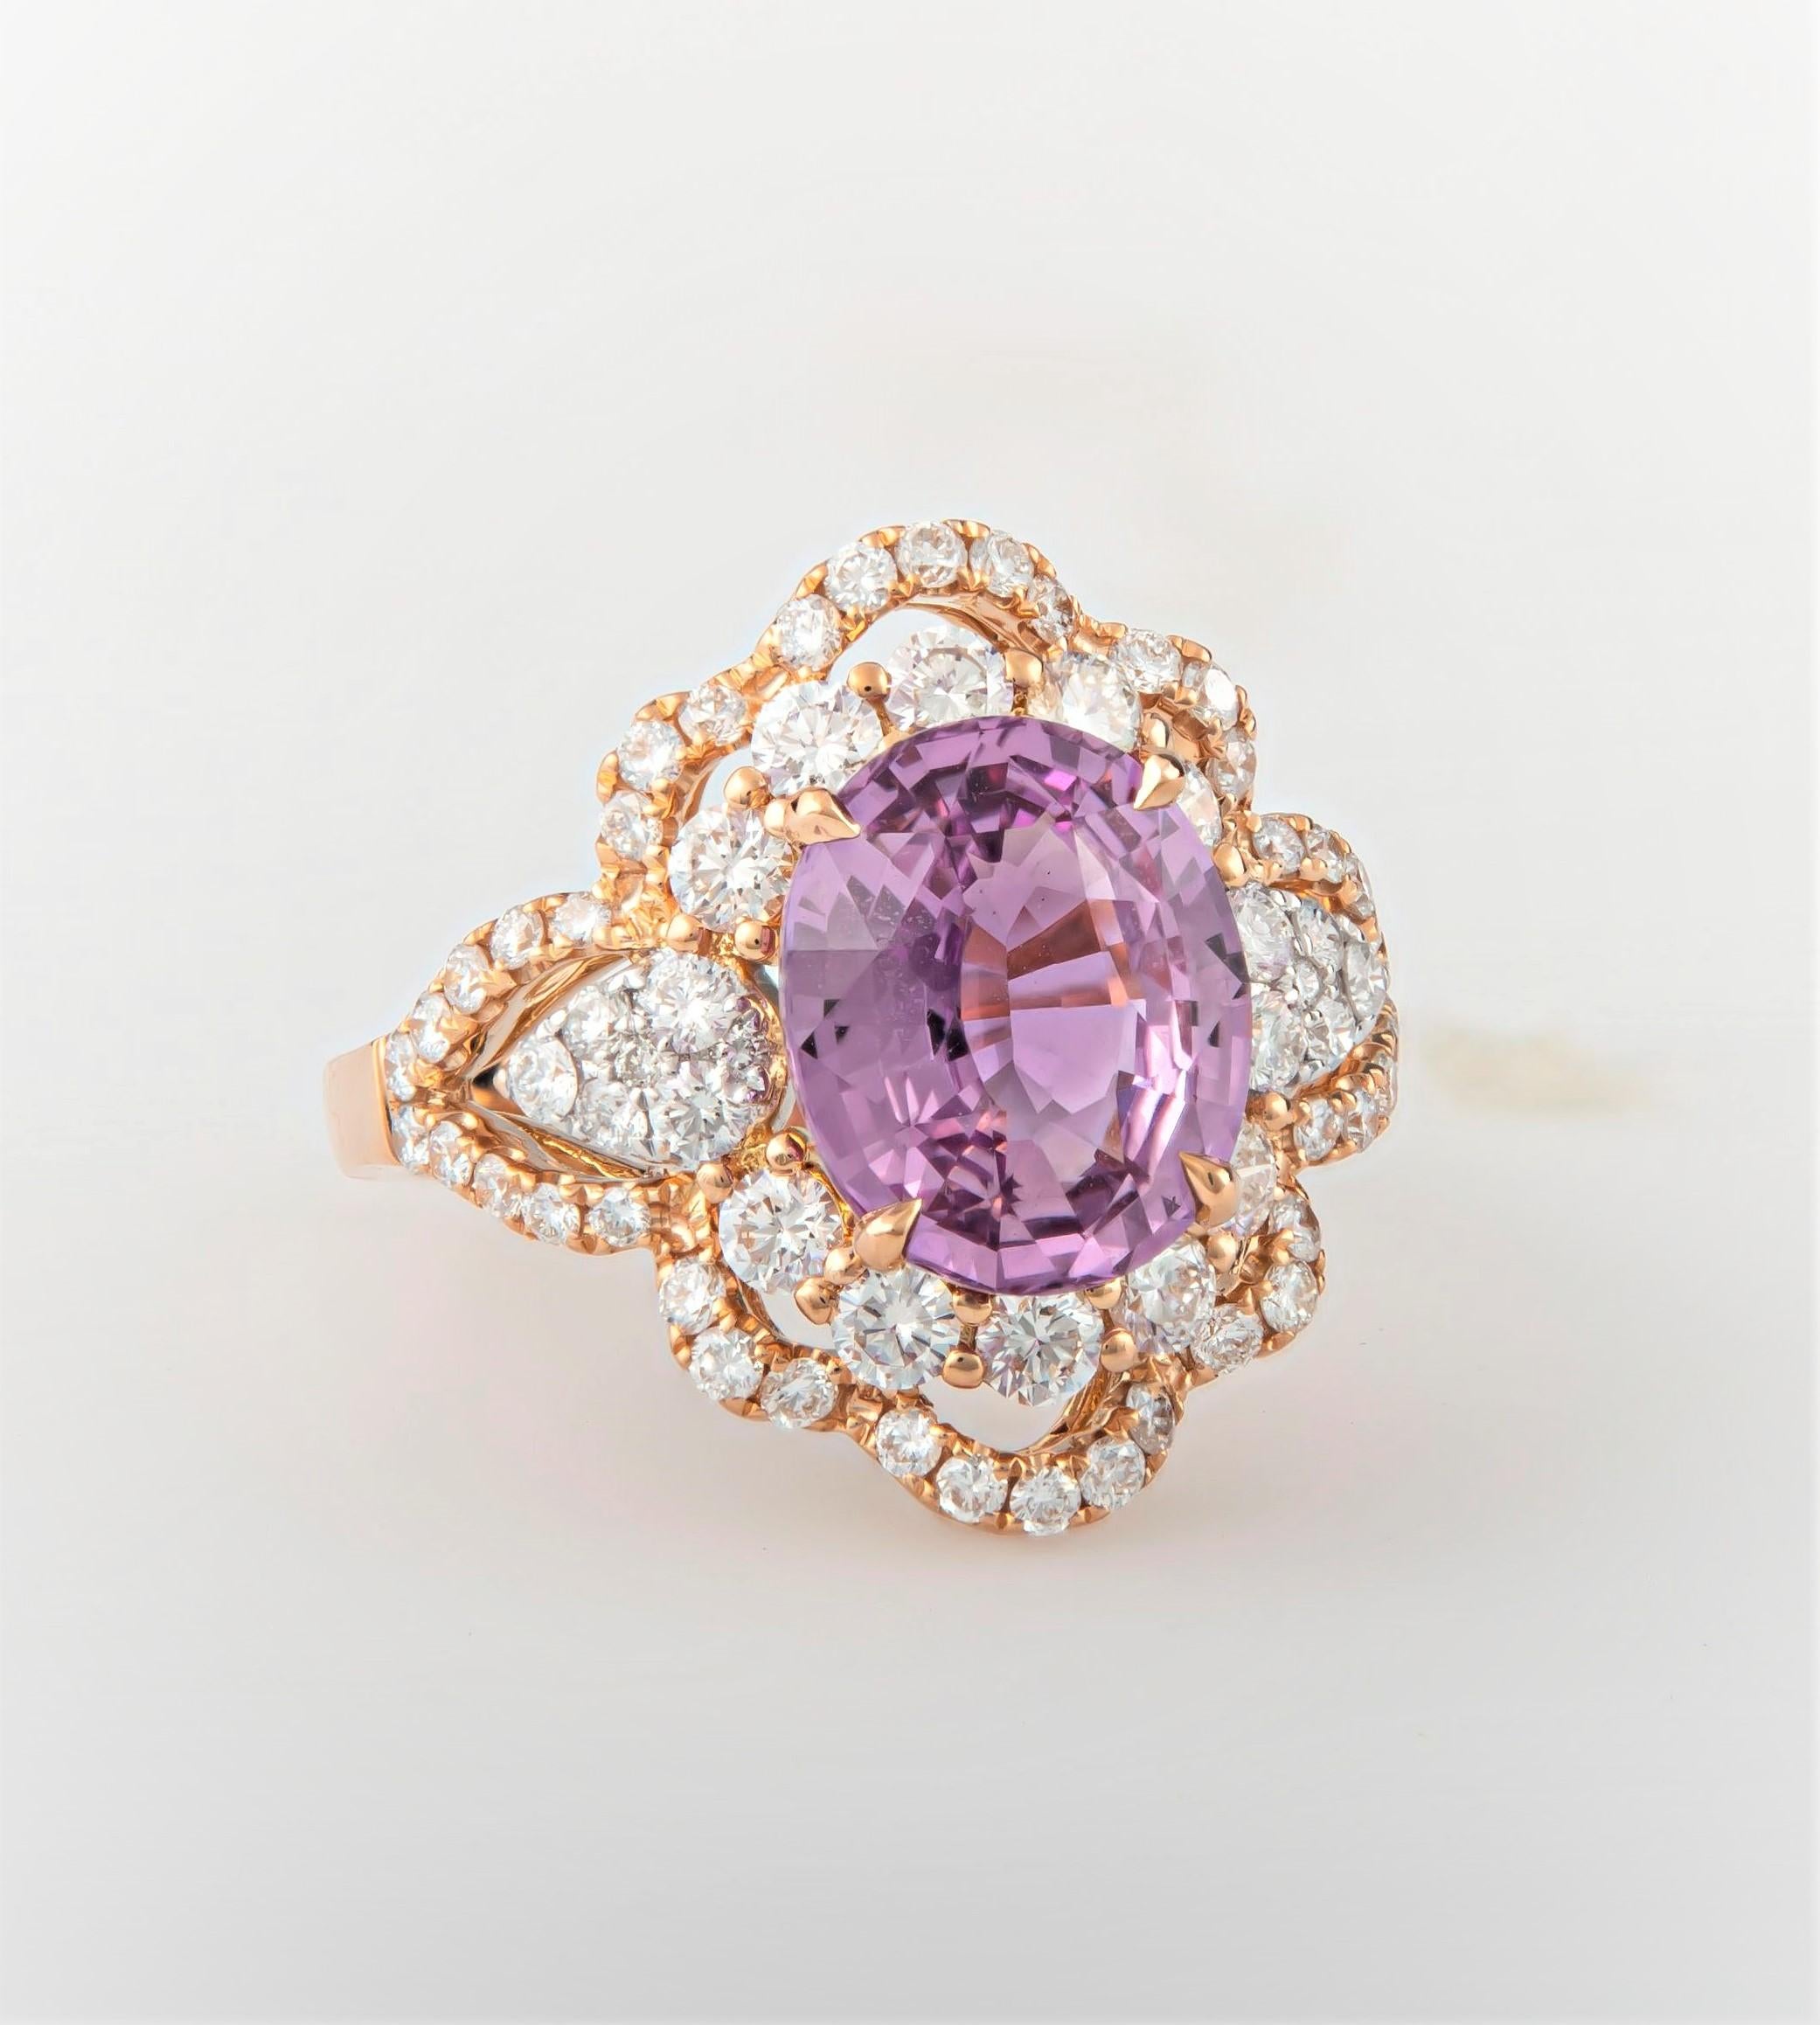 4.75 Carat Oval Purple-Pink Sapphire 'GIA Lab Report' Set in 18 Karat Gold Ring In New Condition For Sale In Houston, TX